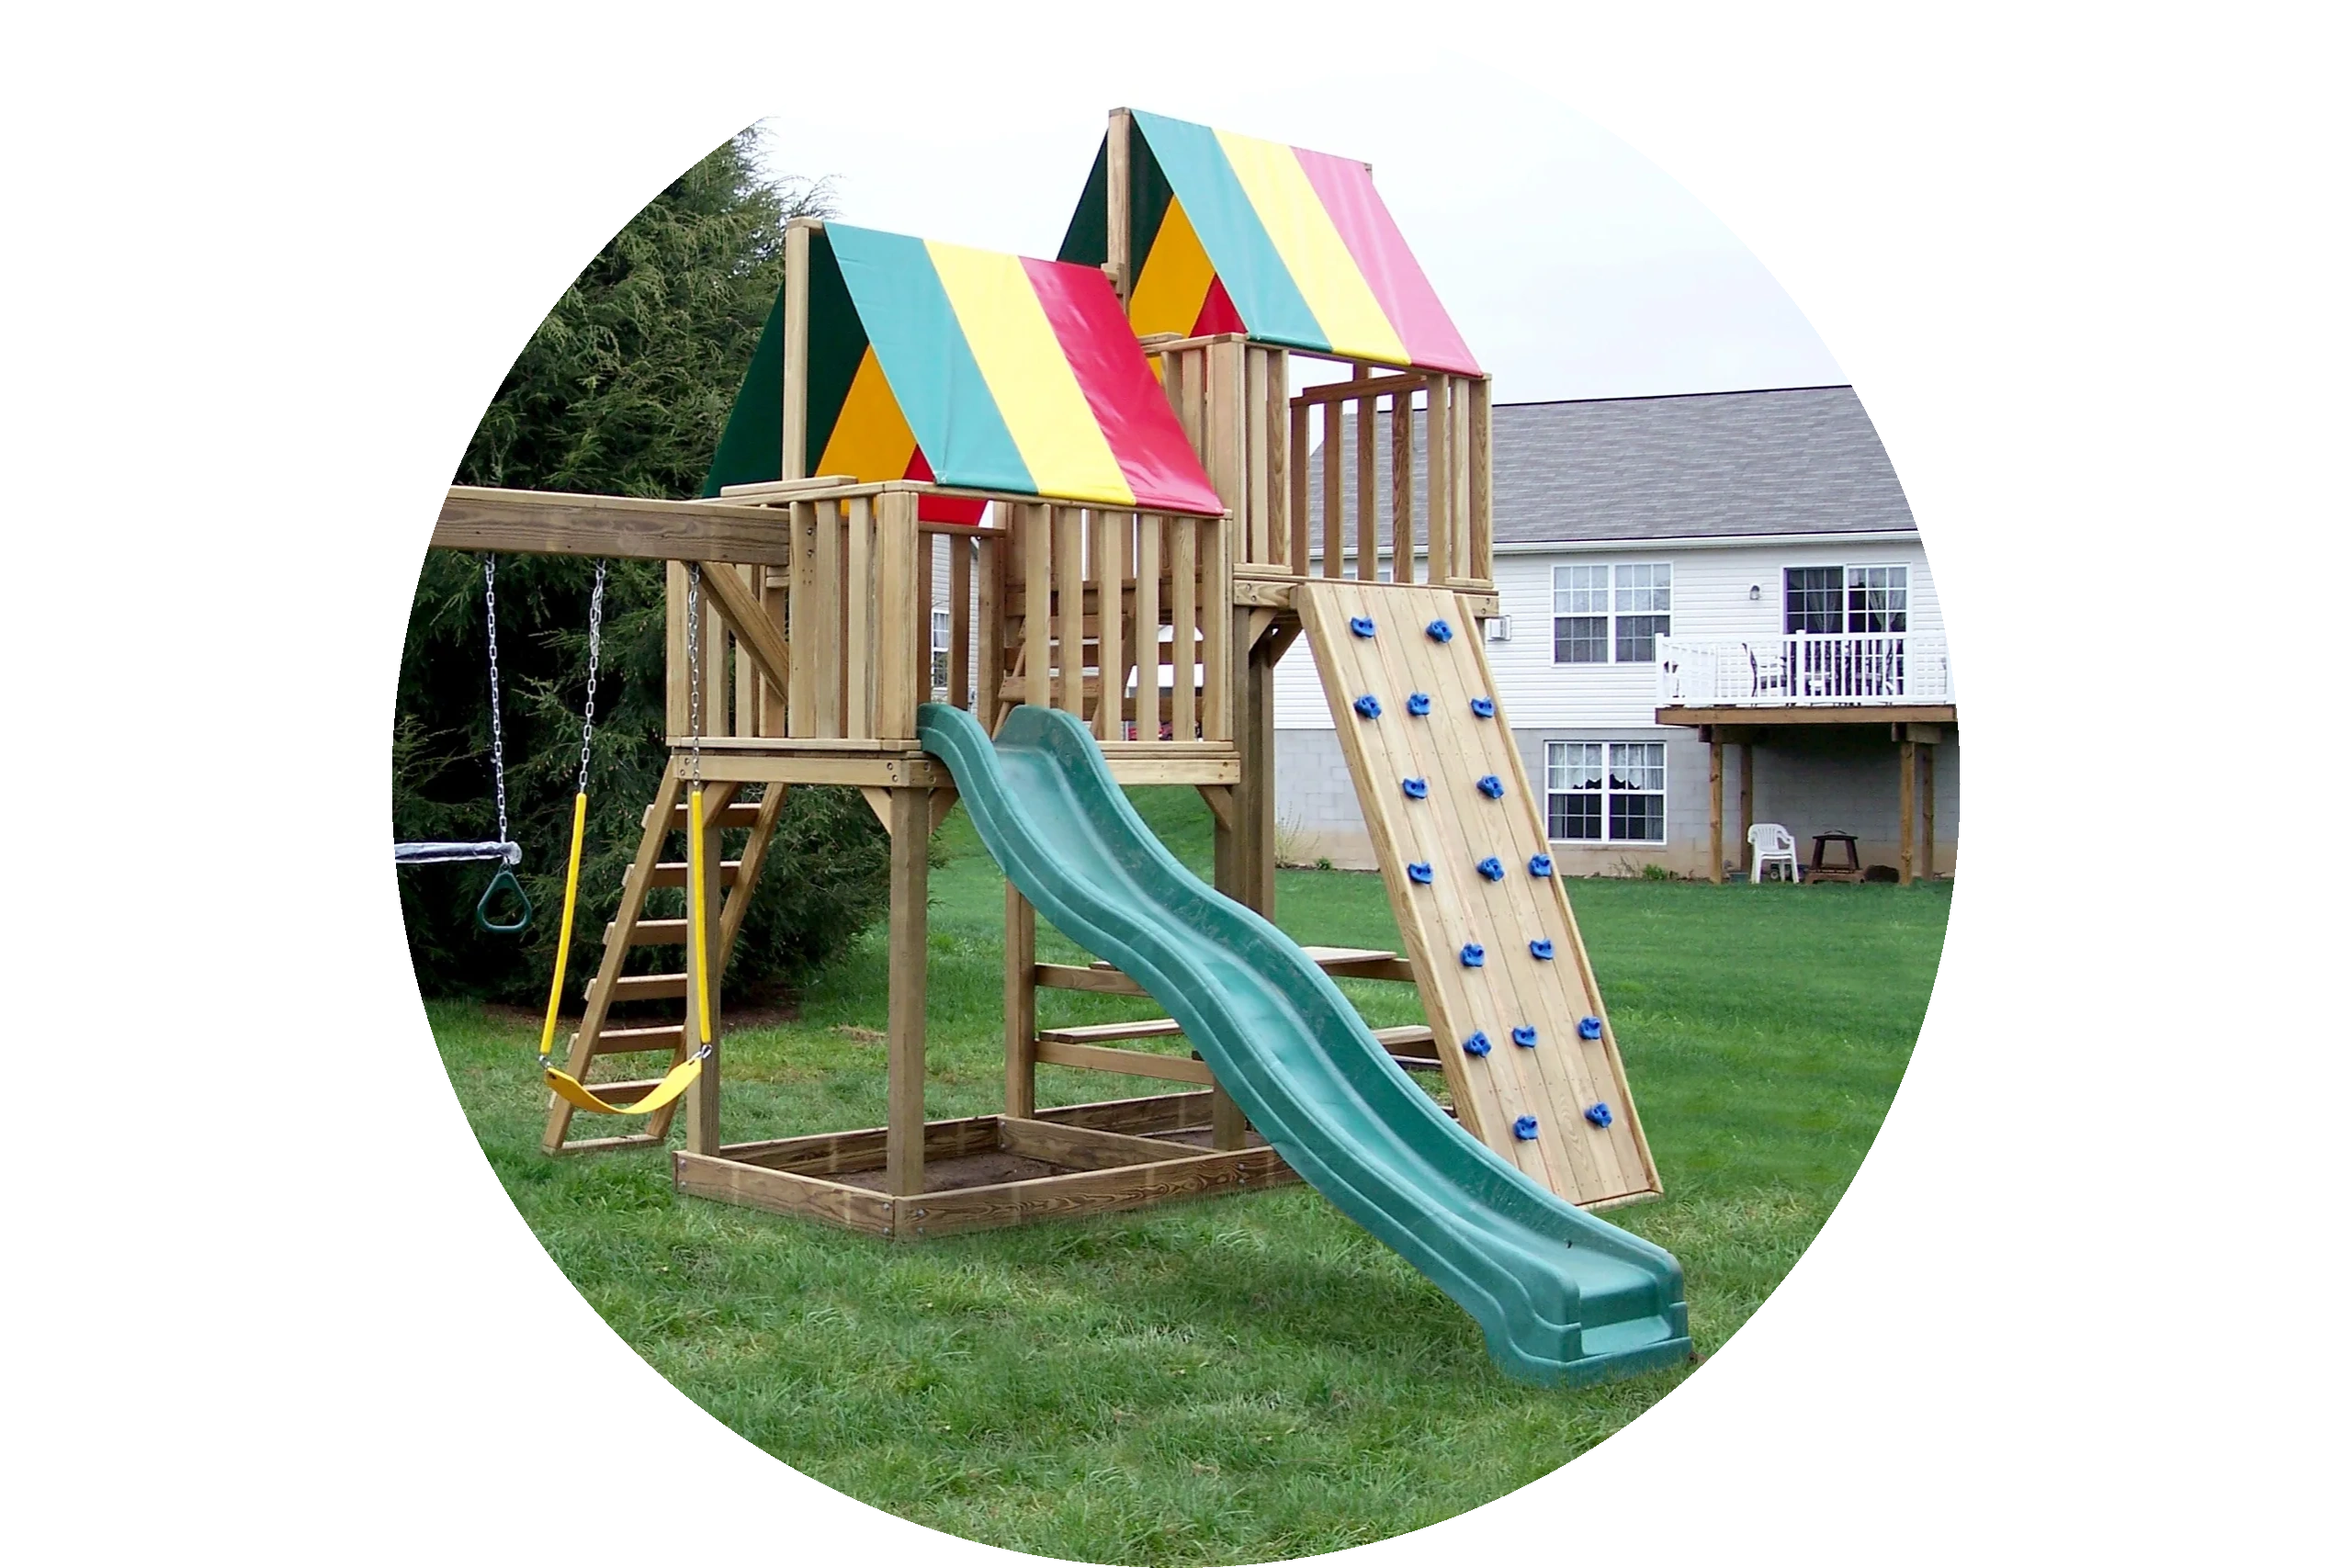 A custom built, large wooden outdoor playset